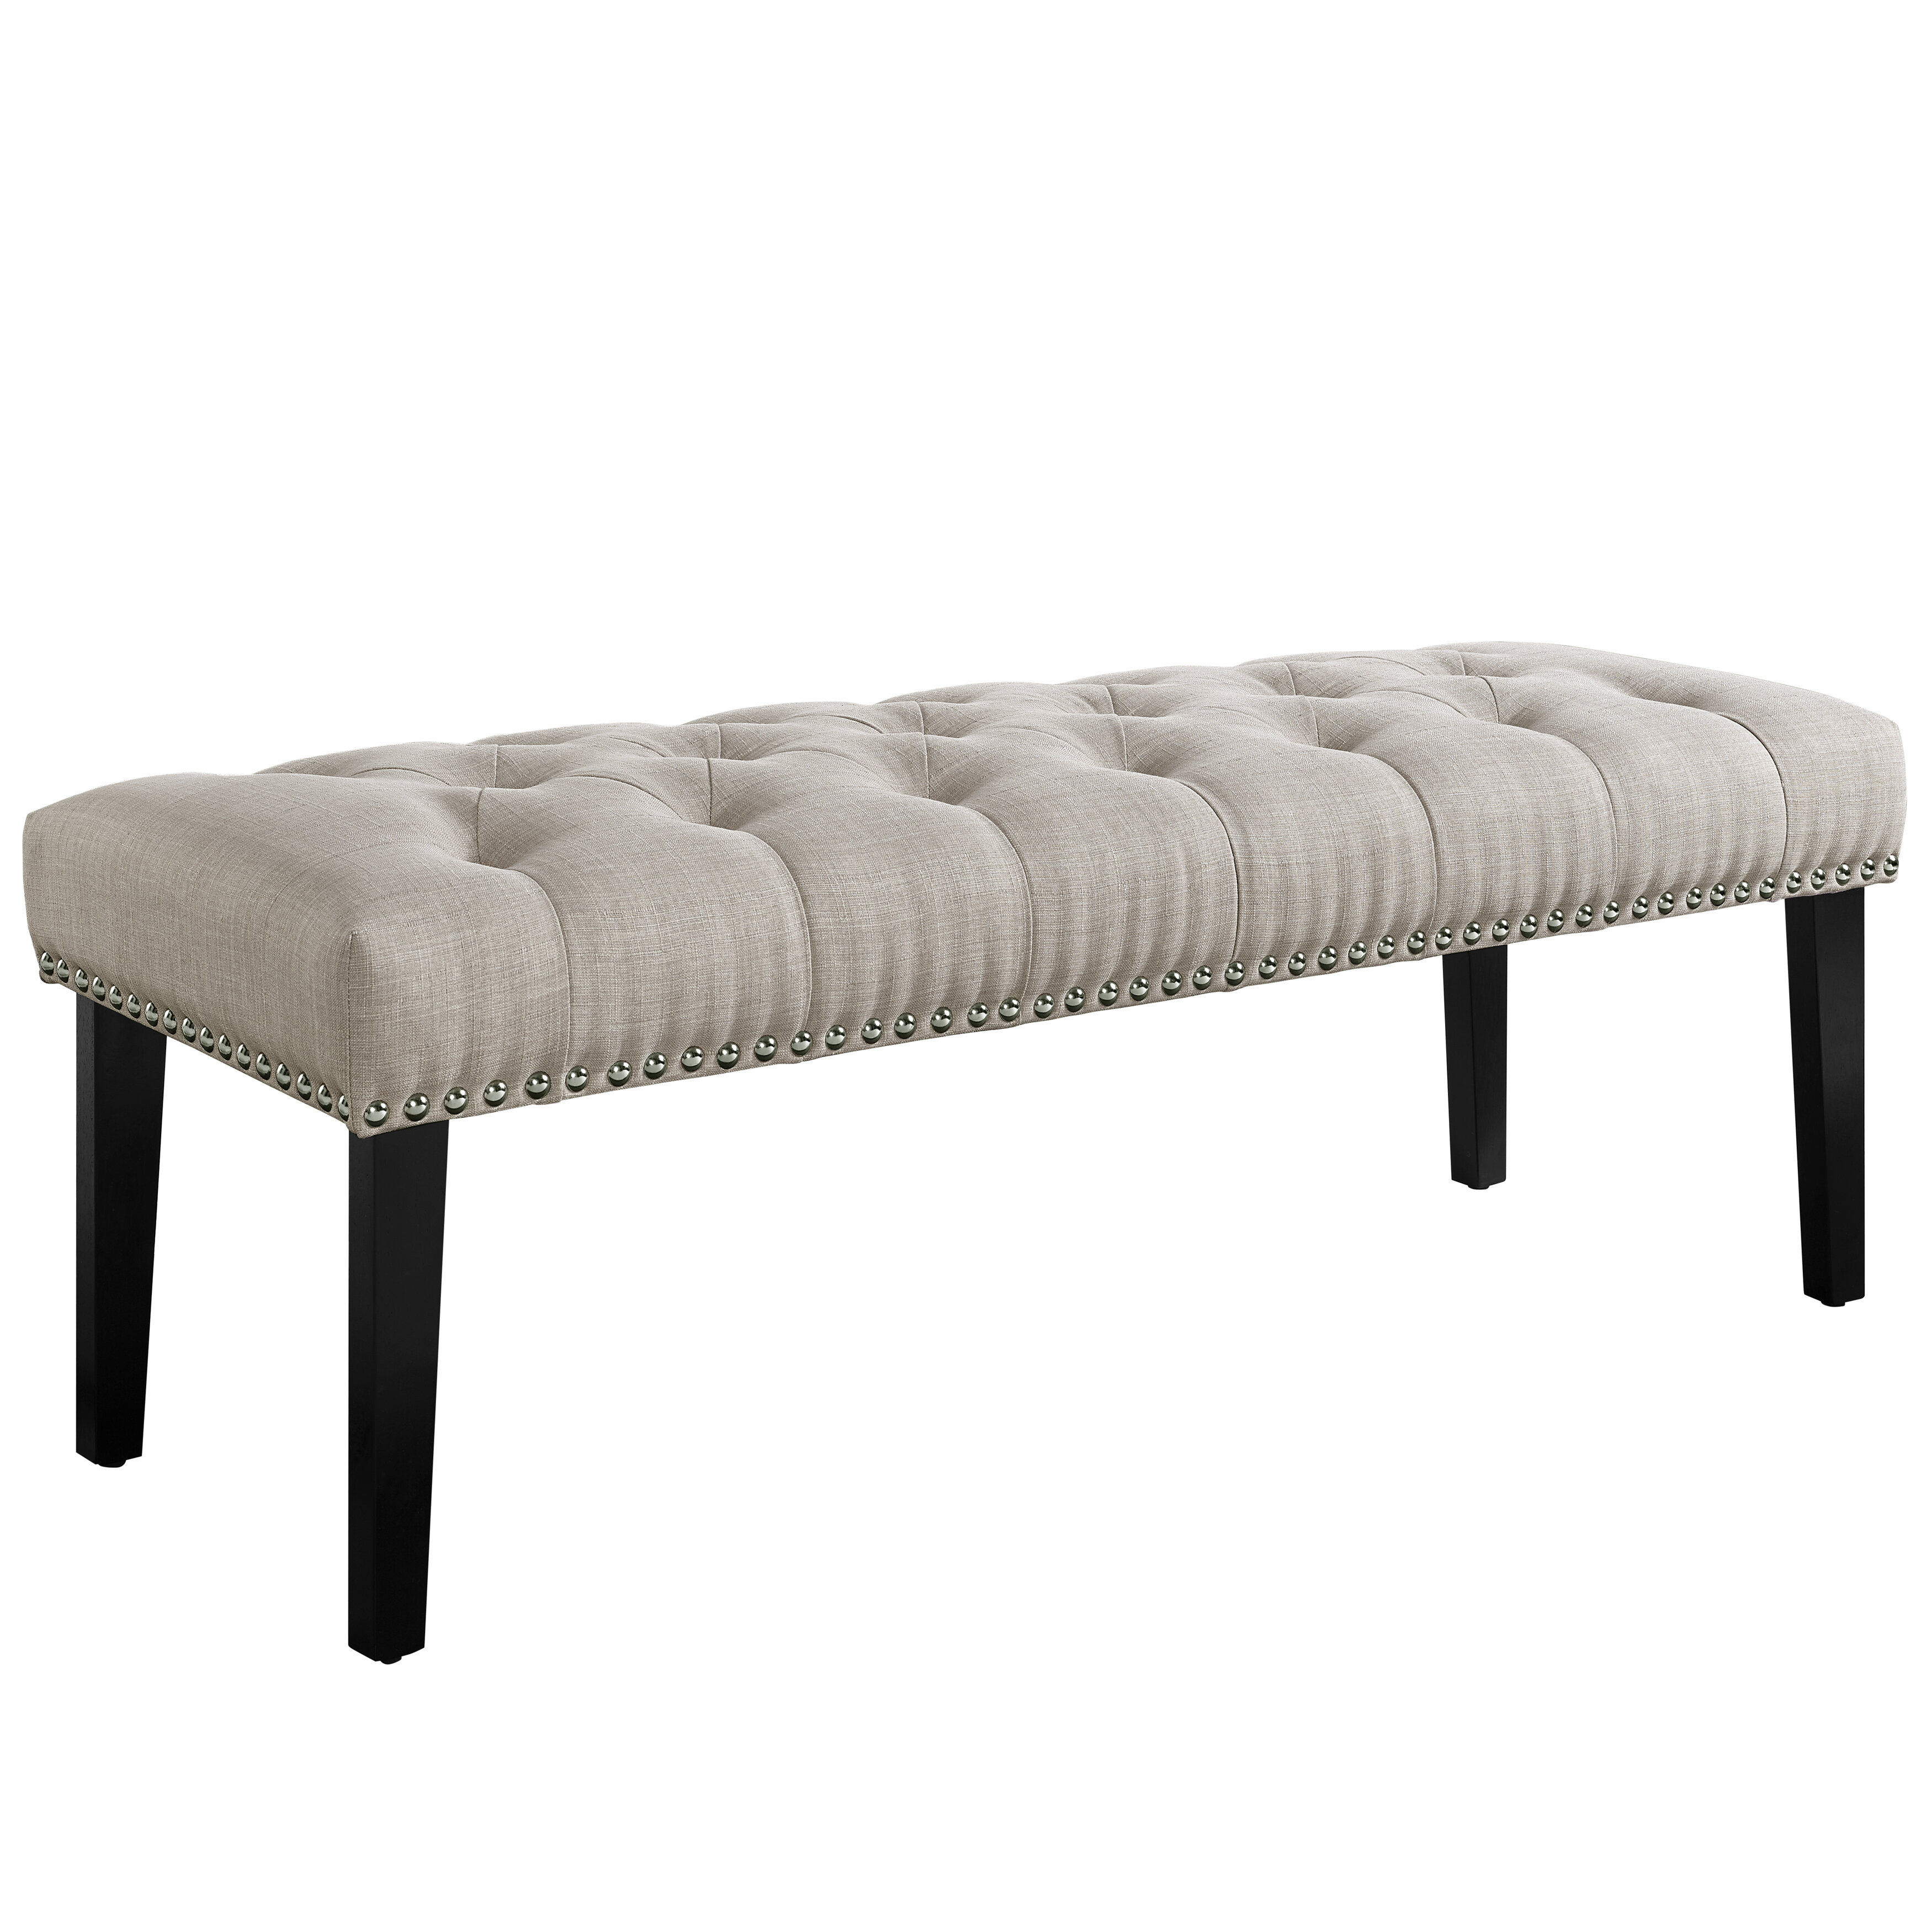 Tufted Benches You Ll Love In 2021 Wayfair